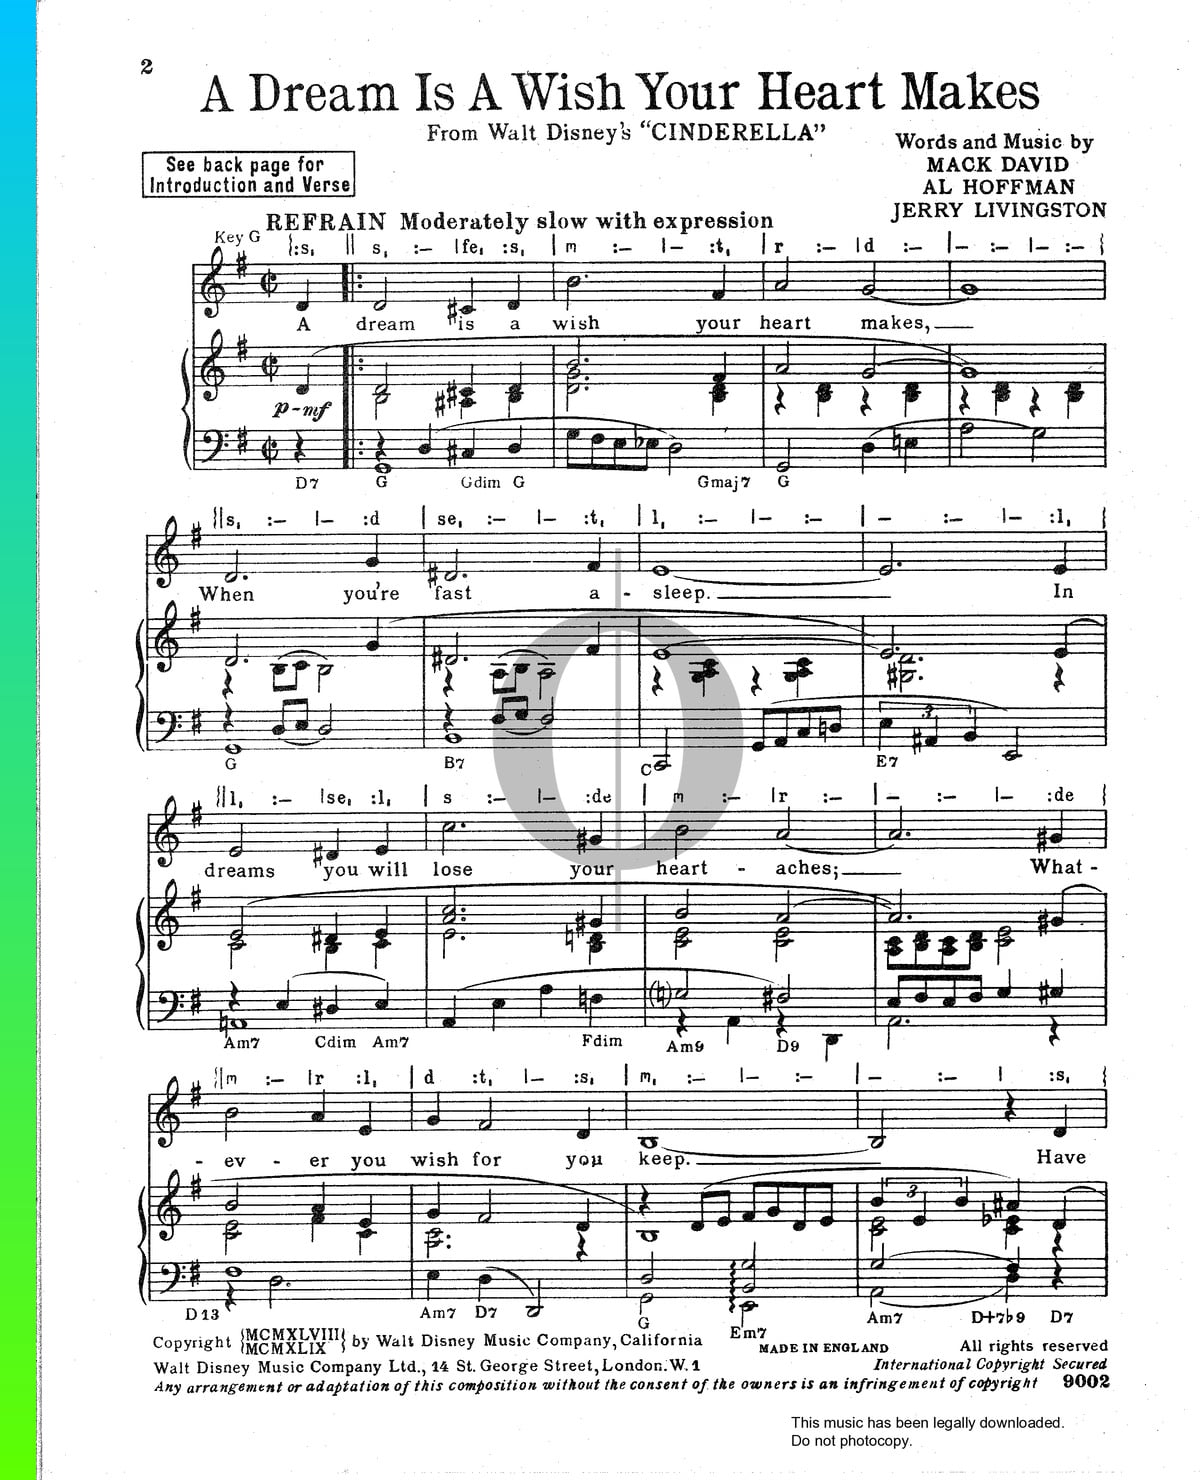 A Dream Is A Wish Your Heart Makes Sheet Music Piano Voice Pdf Download Streaming Oktav